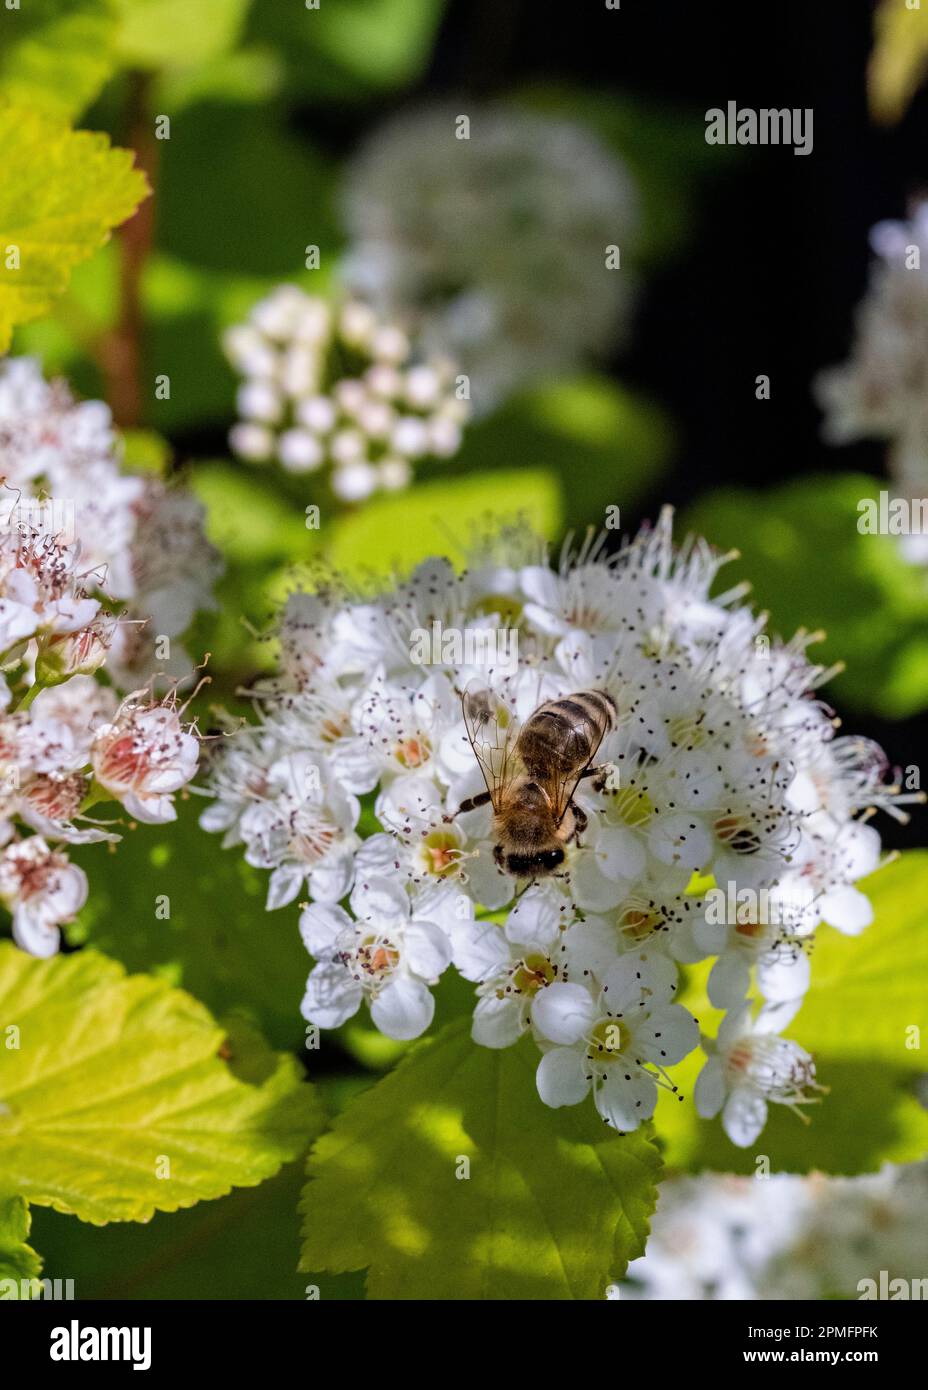 A honey bee (Apis mellifera) collects nectar and pollen on a blossom of elm-leaved spirea (Spiraea chamaedryfolia). Stock Photo